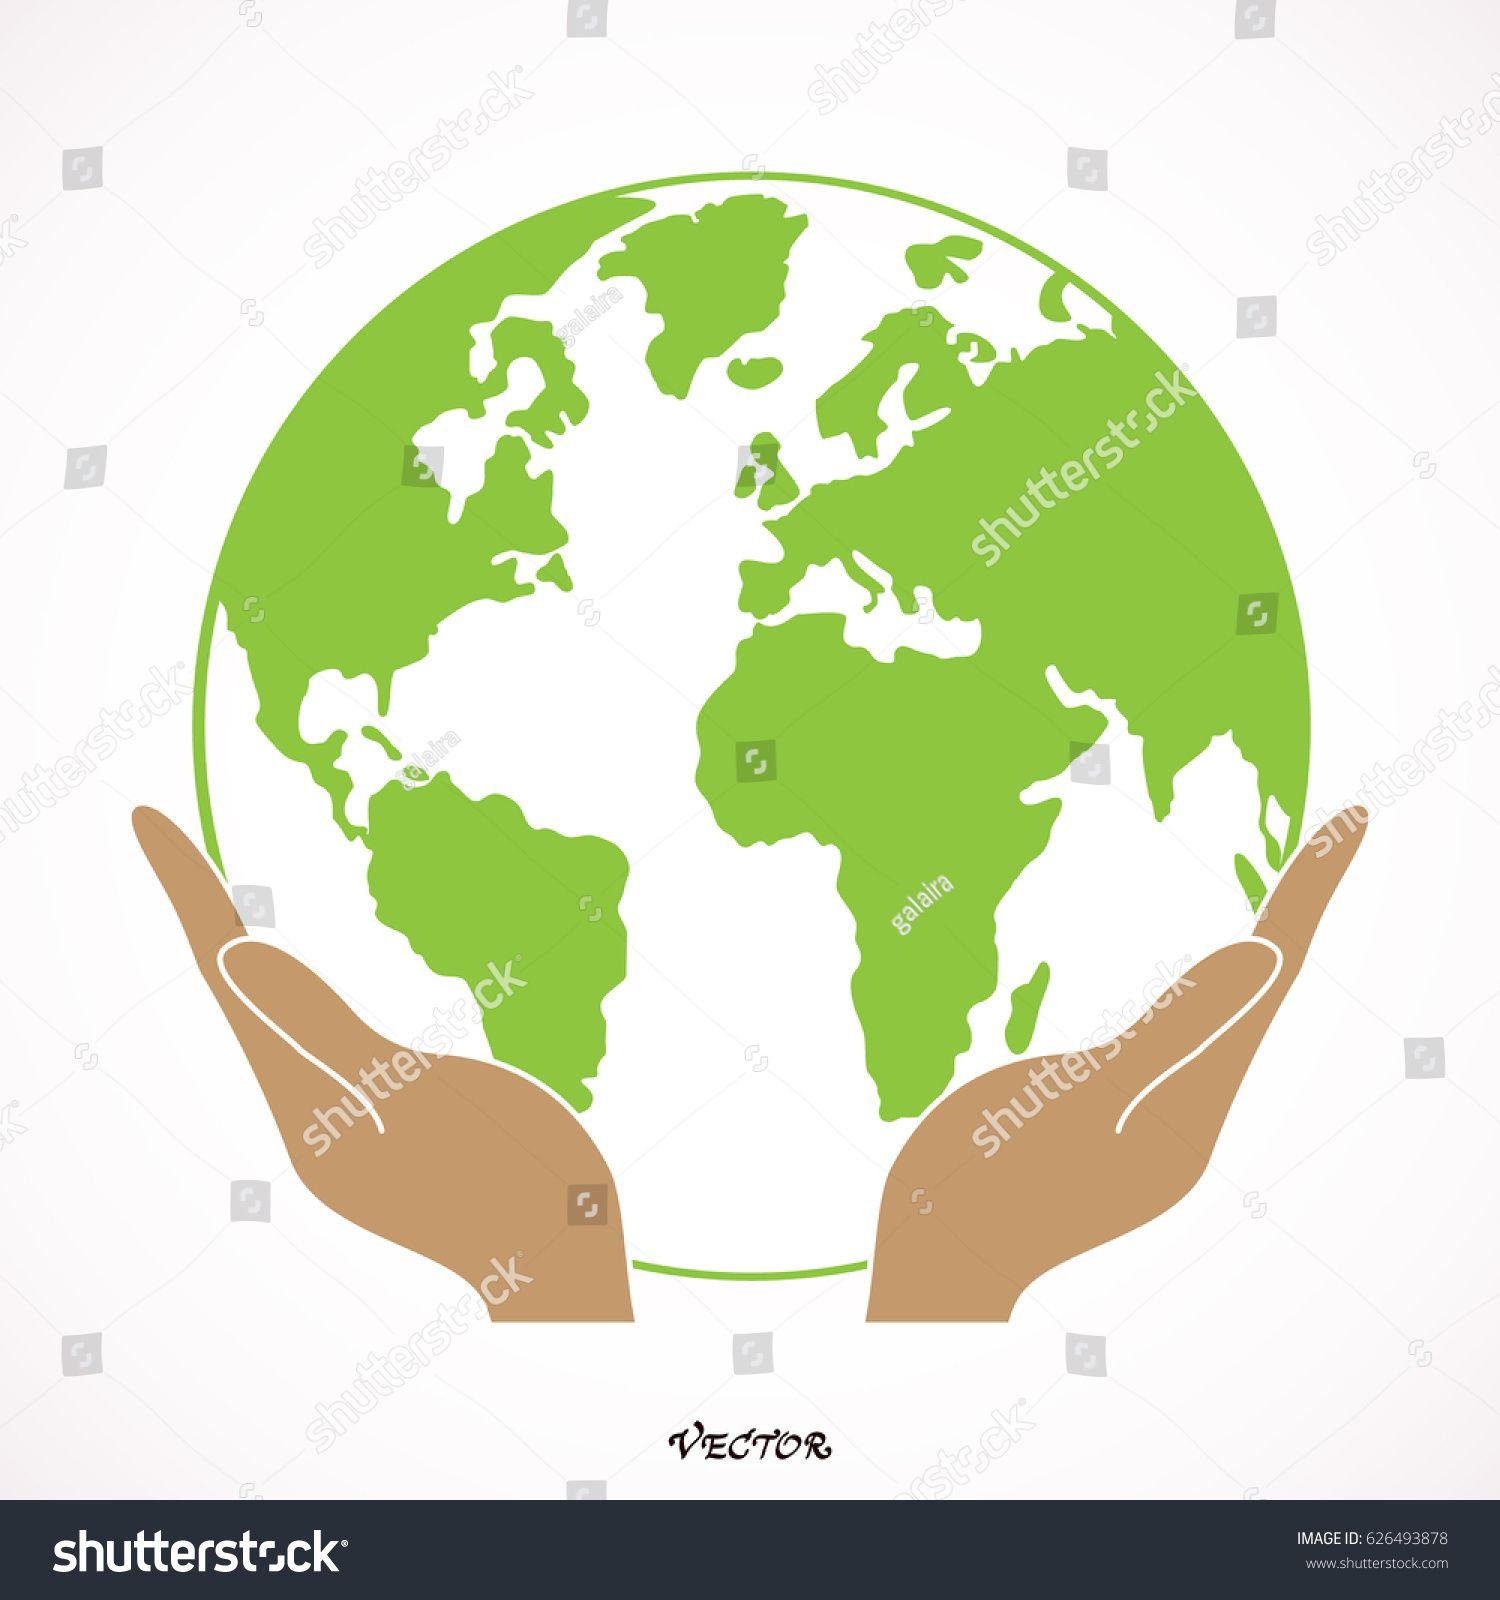 Hands Holding Globe Logo - Two open hands holding globe isolated vector colored icon | Hands ...